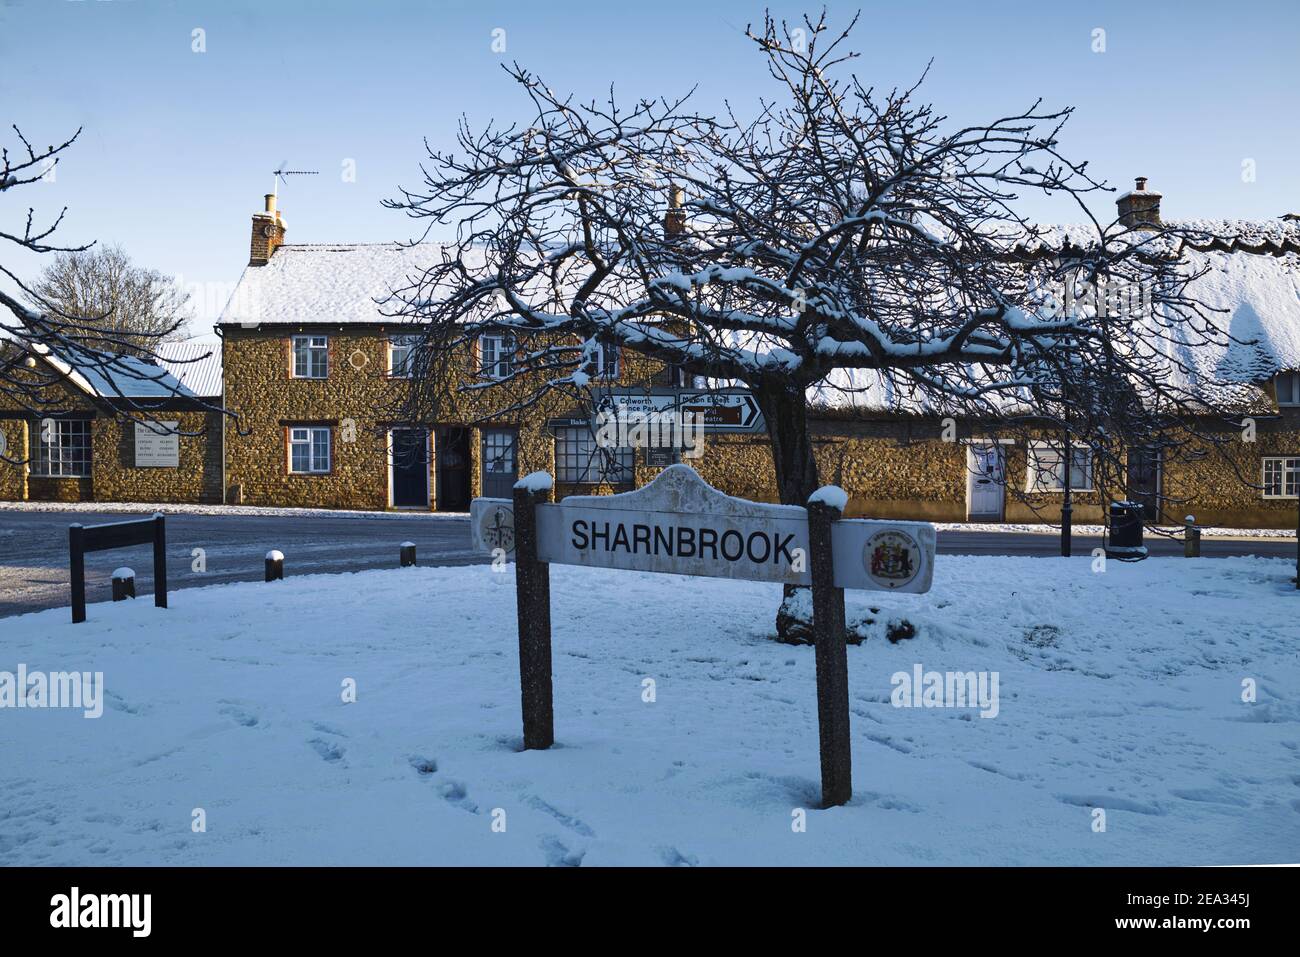 Sharnbrook, Bedfordshire, England, UK - Winter scene after snow with village sign on the green surrounded by thatched cottages Stock Photo